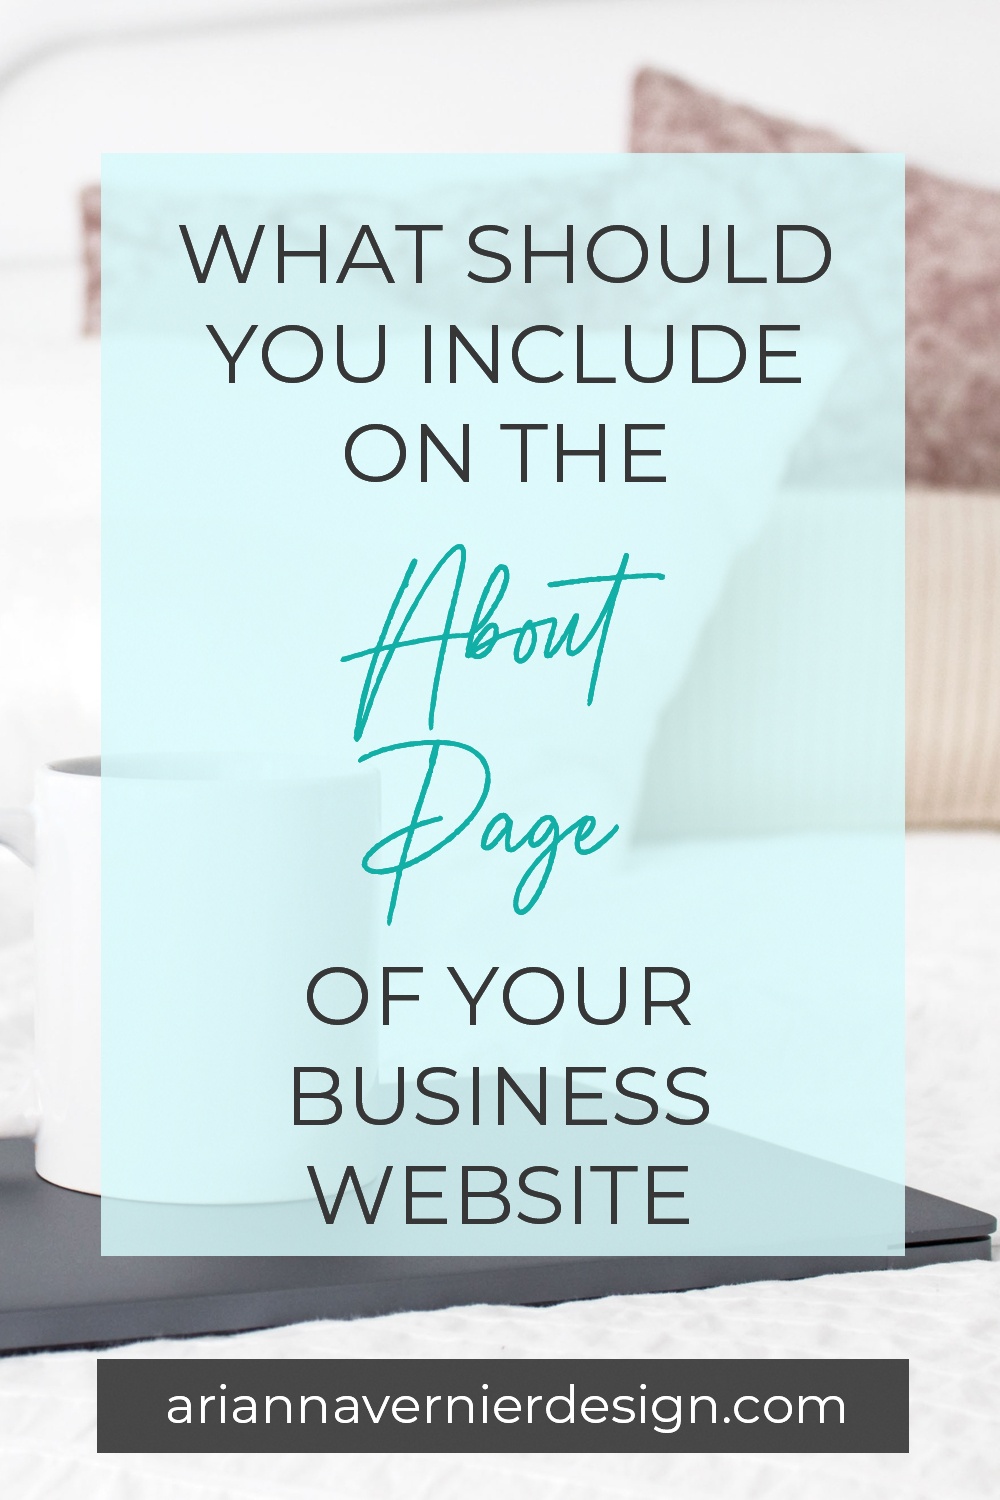 Pinterest pin with a coffee cup on a laptop in the background, with a light blue rectangle over top, and the title "What Should You Include on the About Page of Your Business Website?"